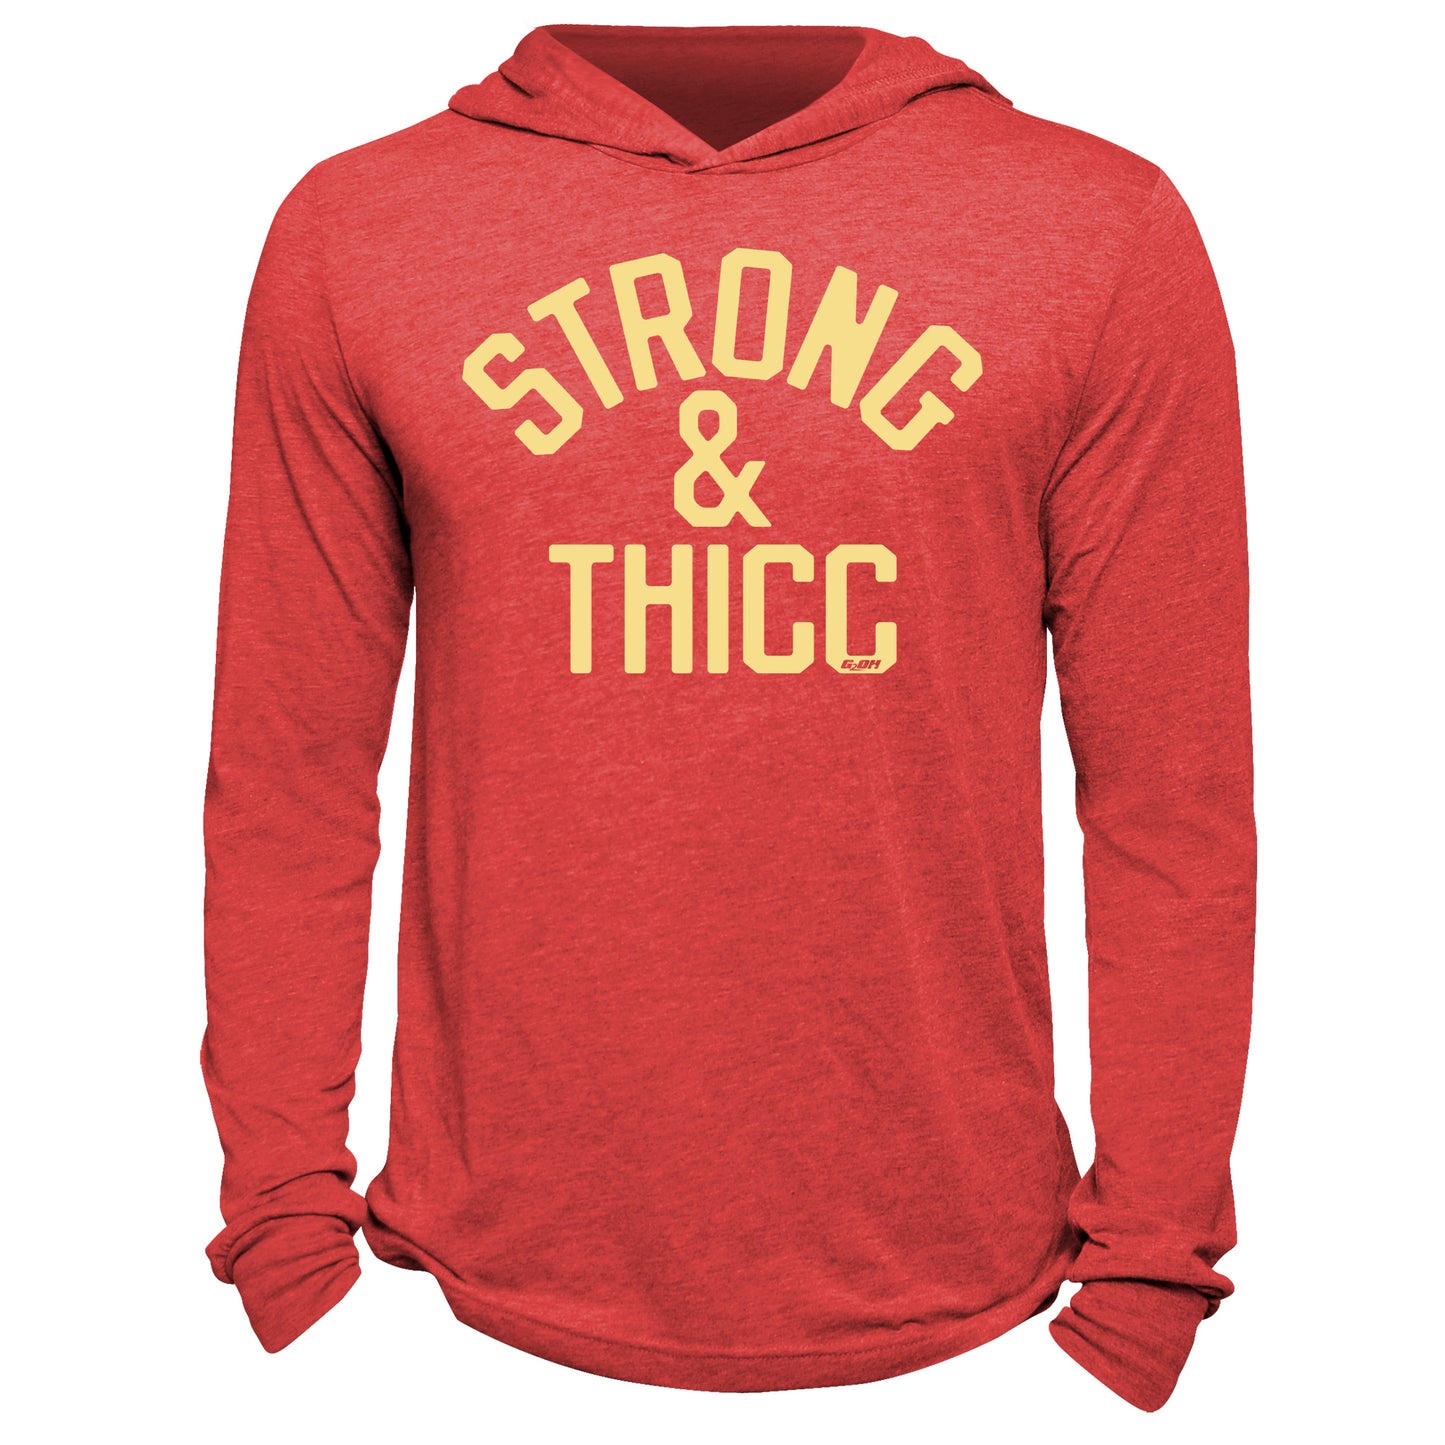 Strong & Thicc Hoodie